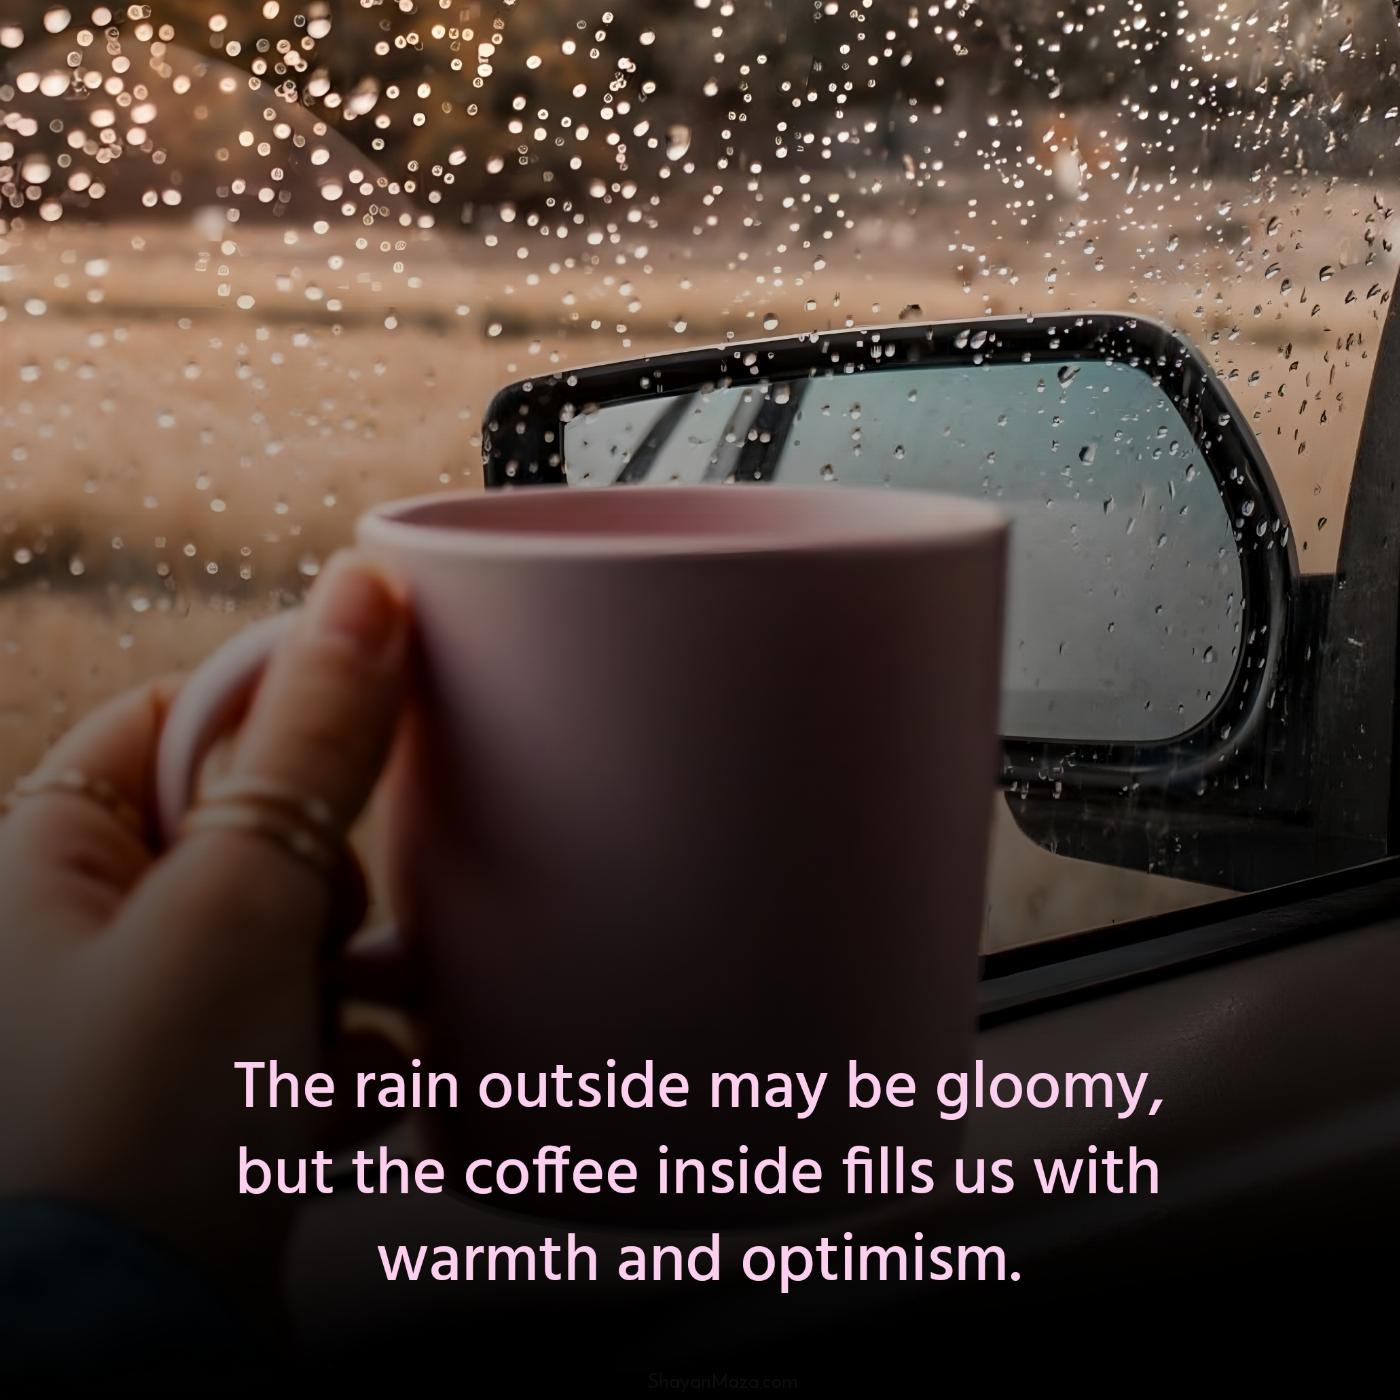 The rain outside may be gloomy but the coffee inside fills us